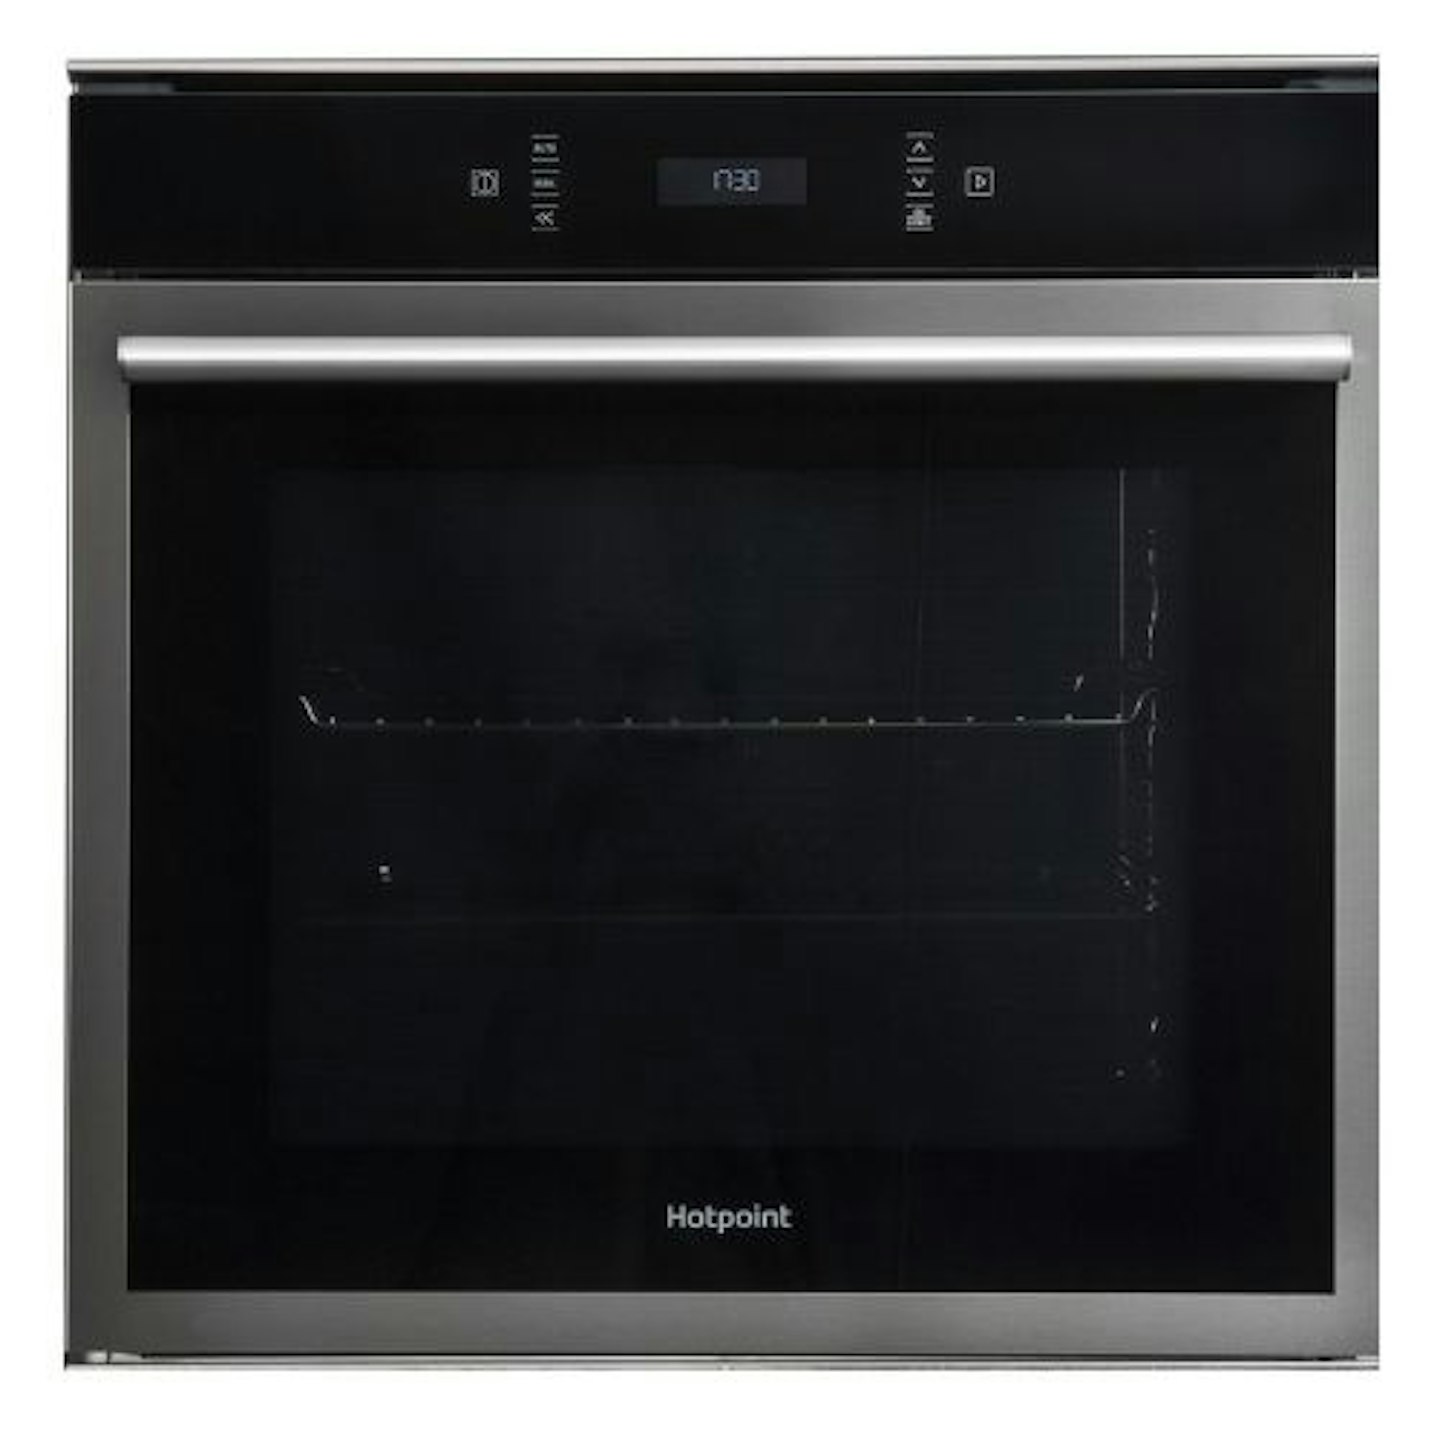 Hotpoint Class 6 Single Built-In Oven